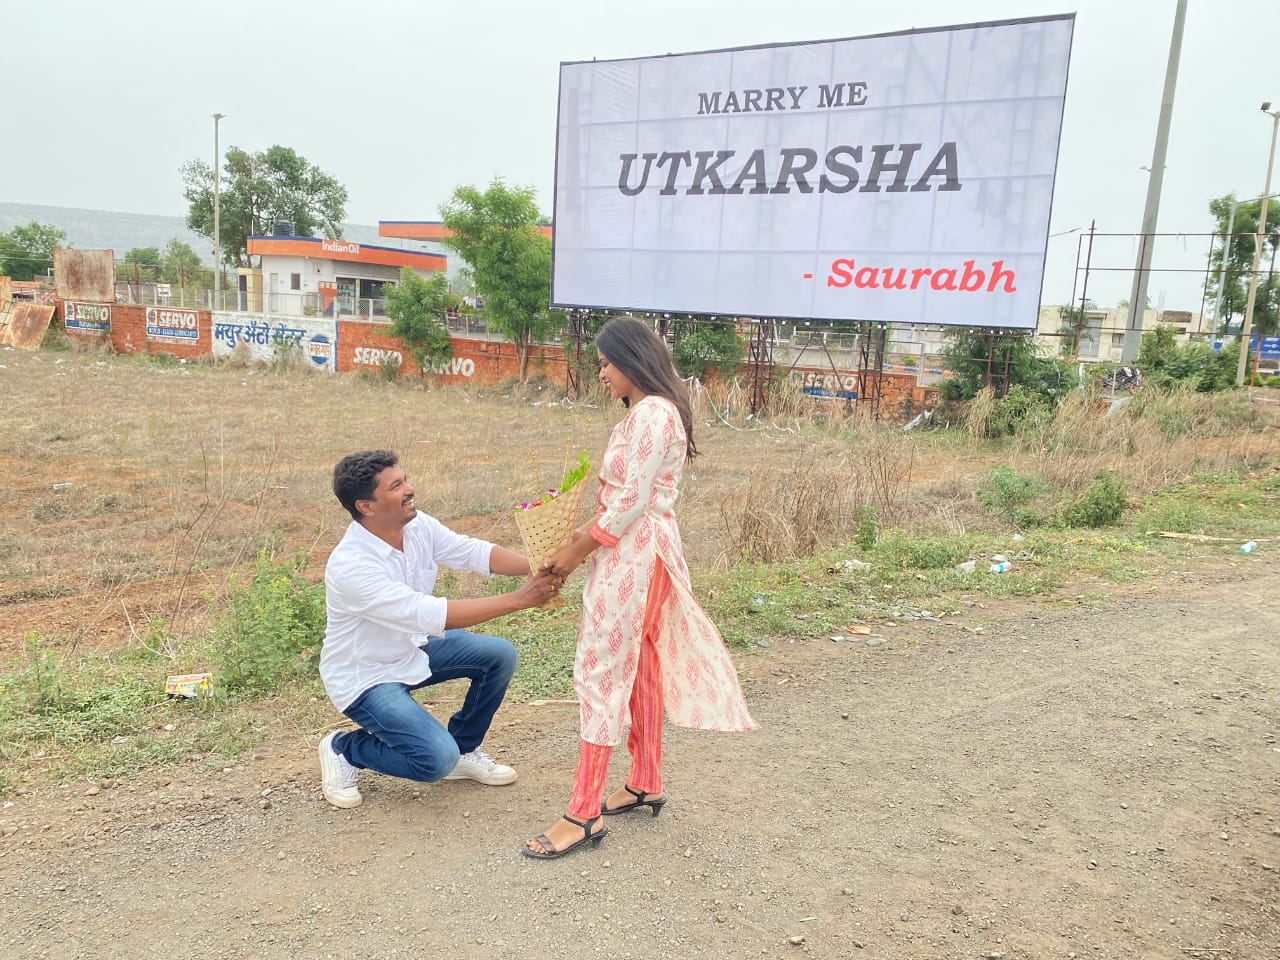 Youth proposes girl for marriage in different ways goes viral